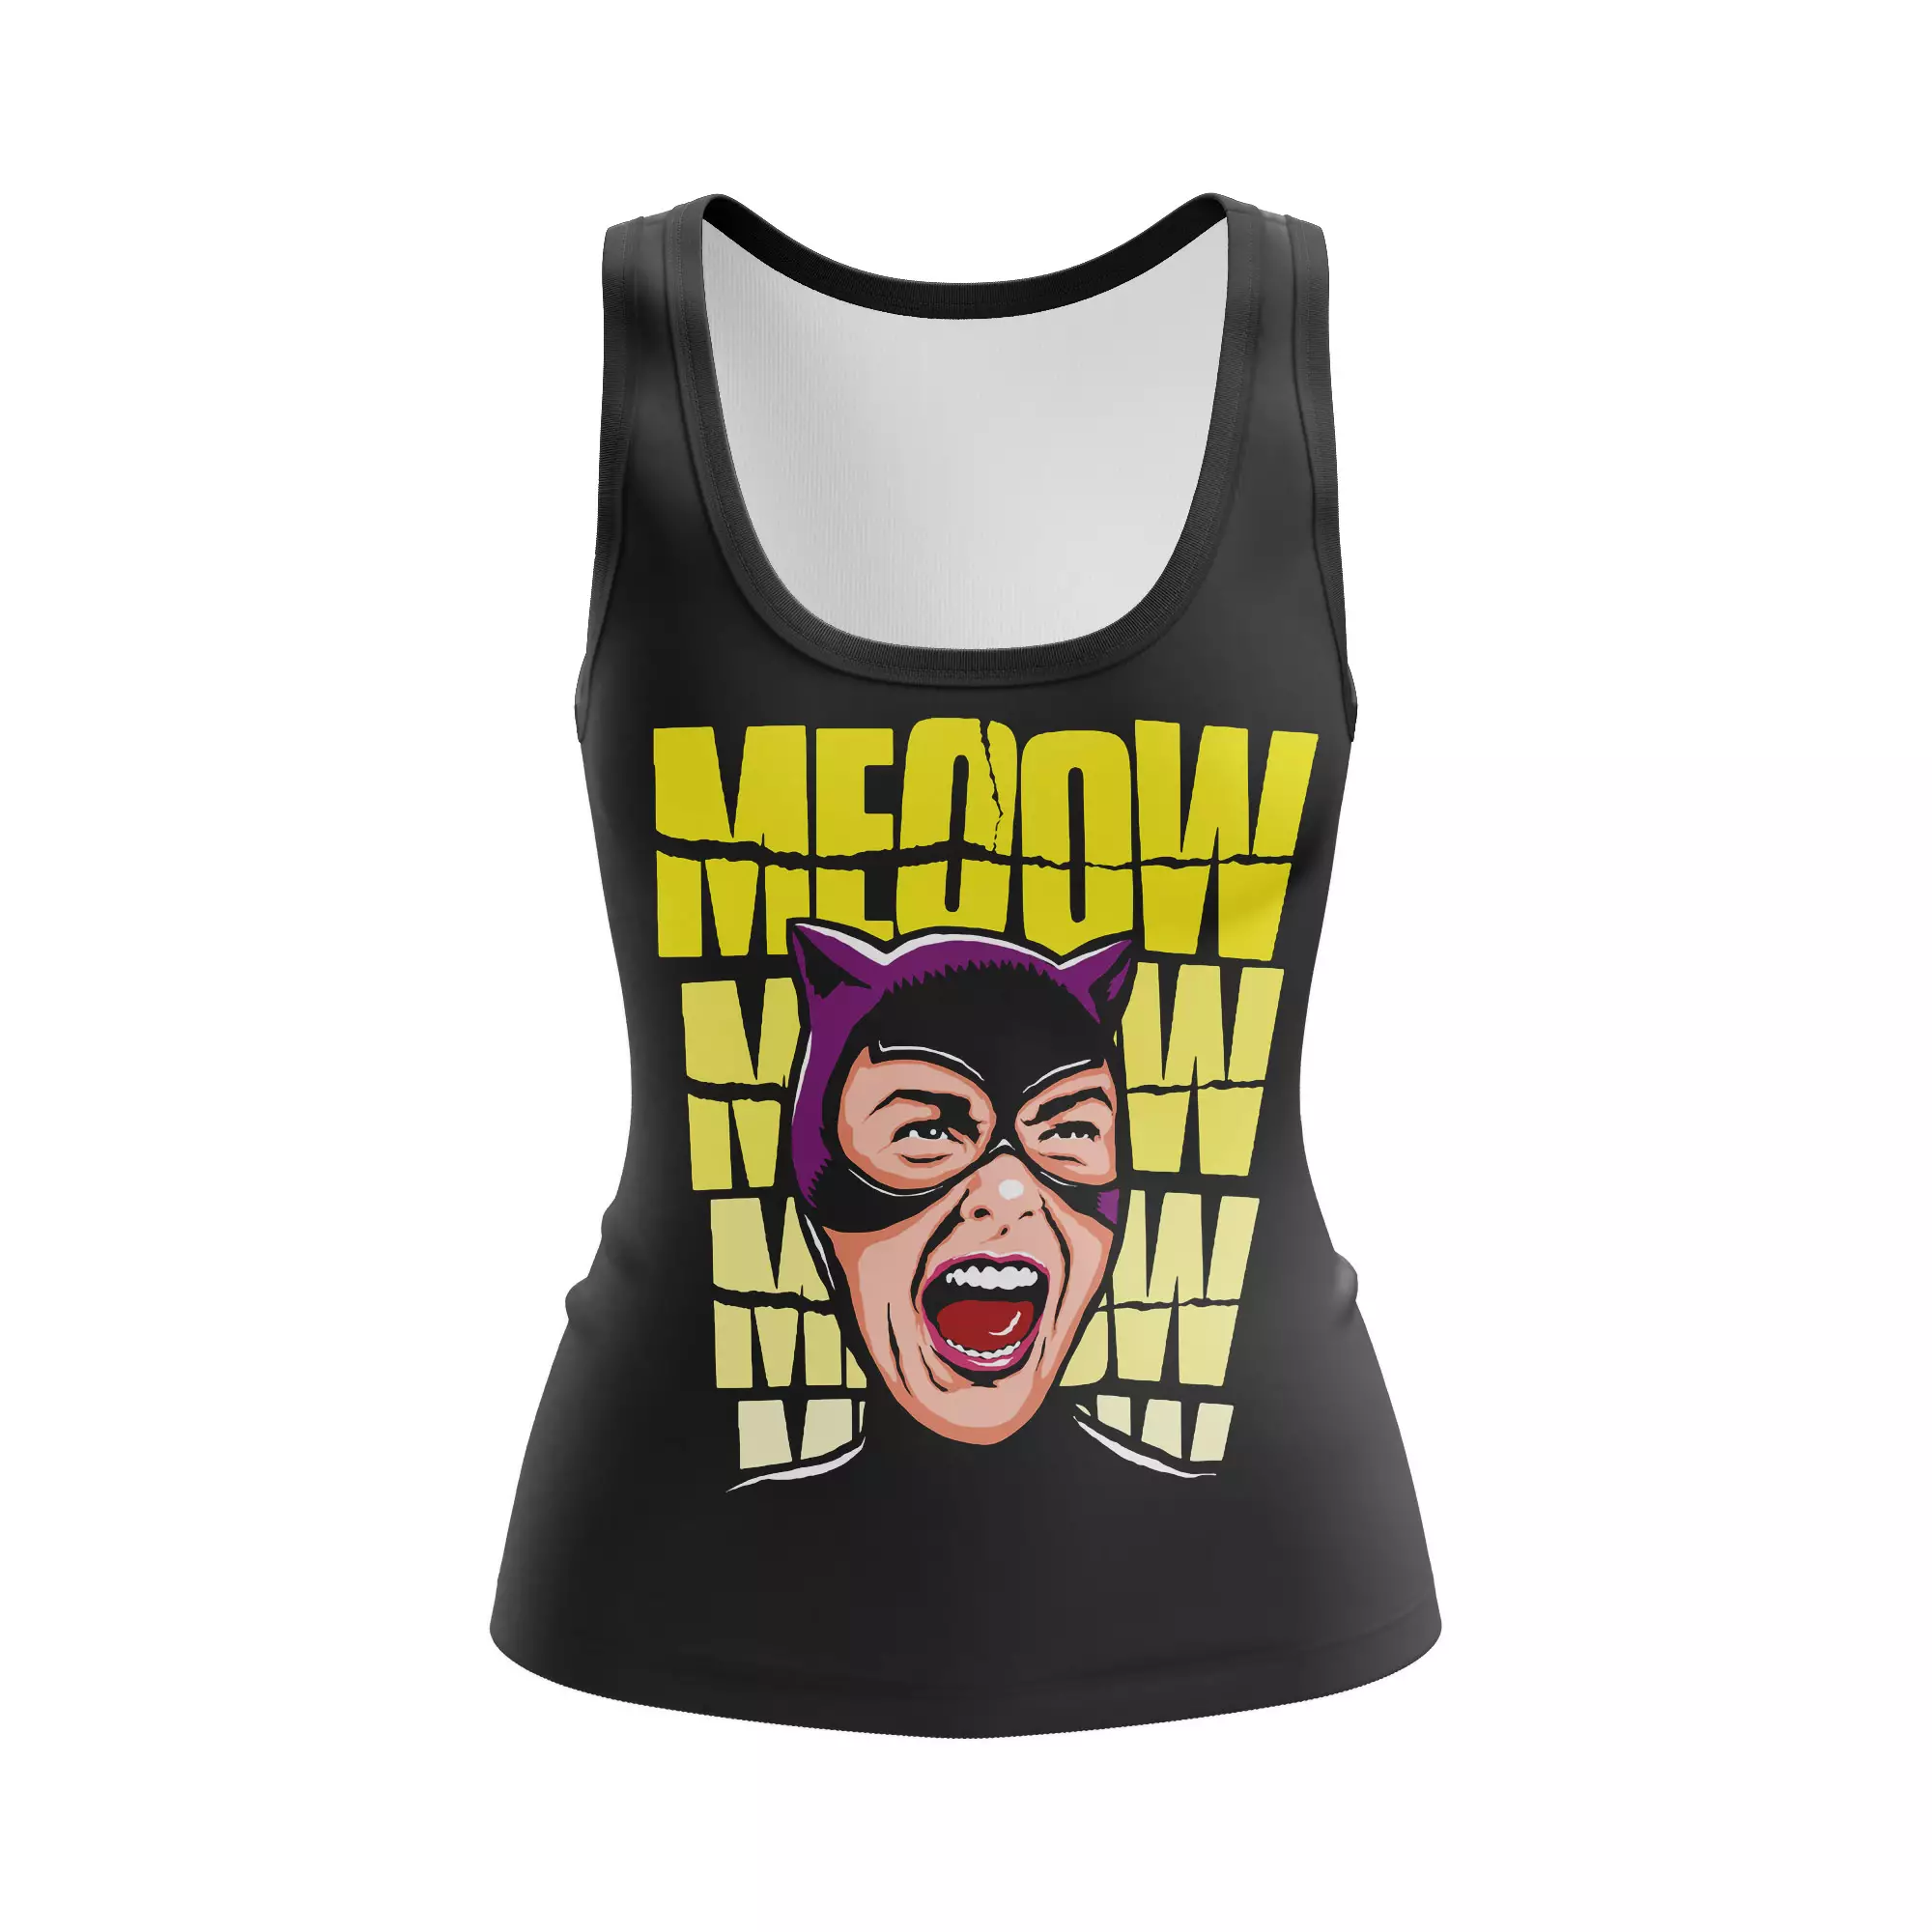 Women’s tank Meow Catwoman Vest Idolstore - Merchandise and Collectibles Merchandise, Toys and Collectibles 2